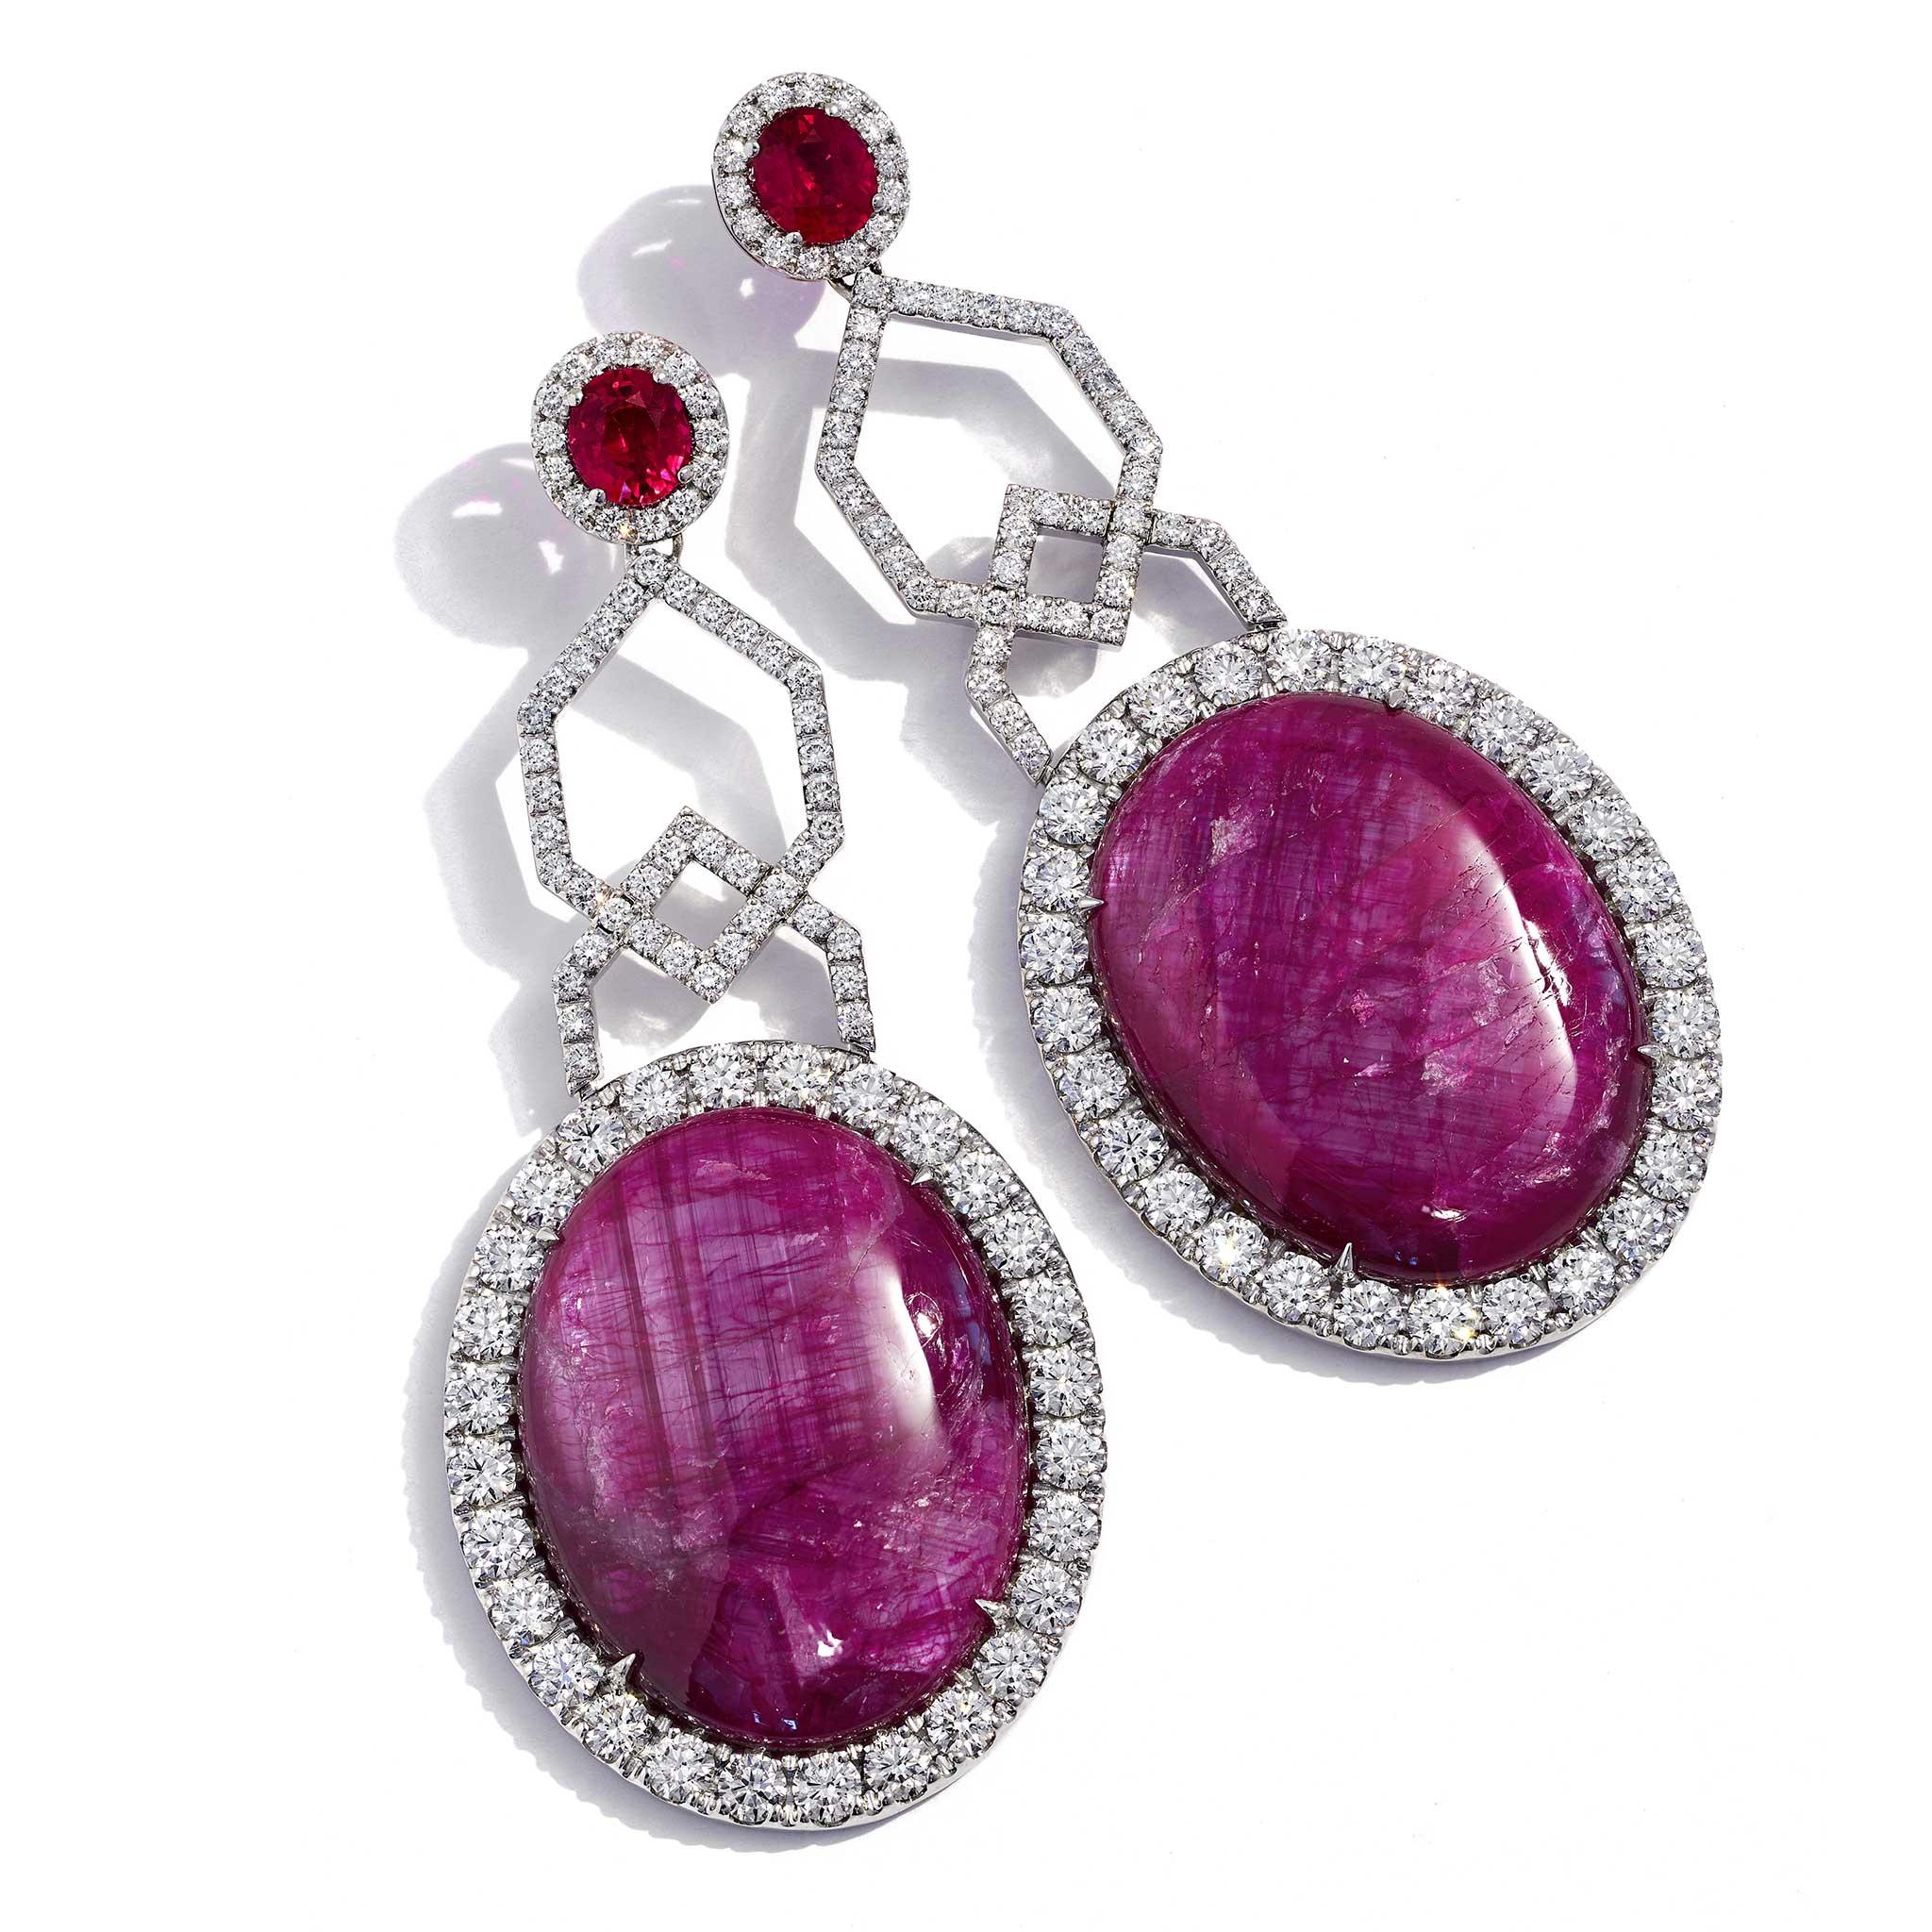 Oval Cut Ruby and Diamond Drop Earrings Set in 18k White Gold by Shirin Uma For Sale